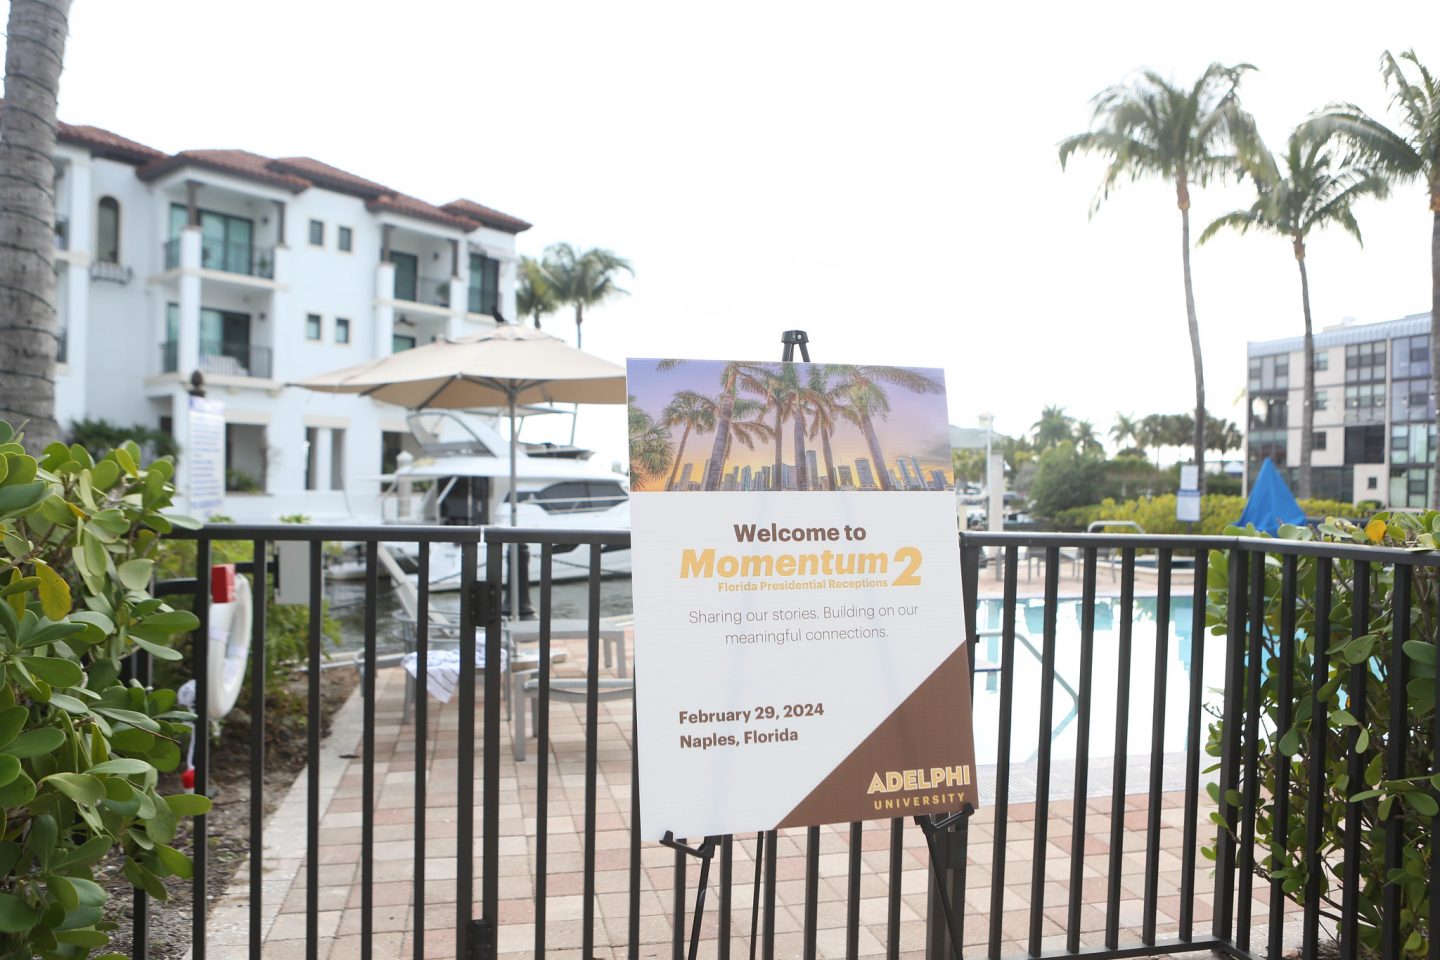 Palm trees and warm breezes welcomed Adelphi’s guests.